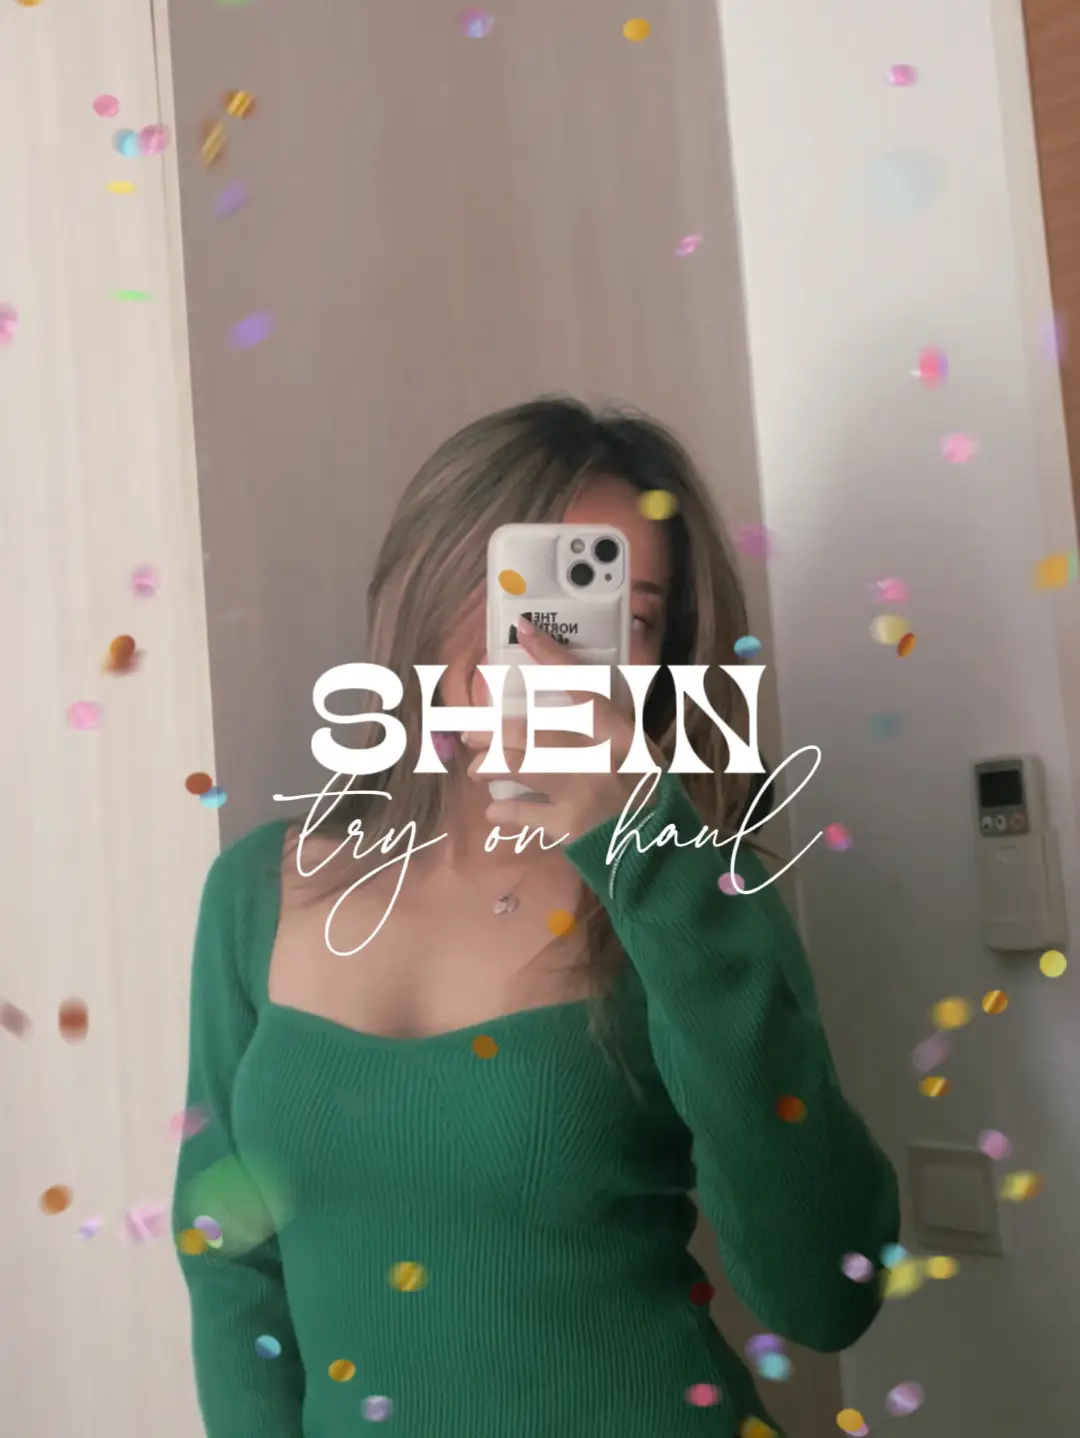 Fit archives, build fits with me ft. shein haul, Video published by mav